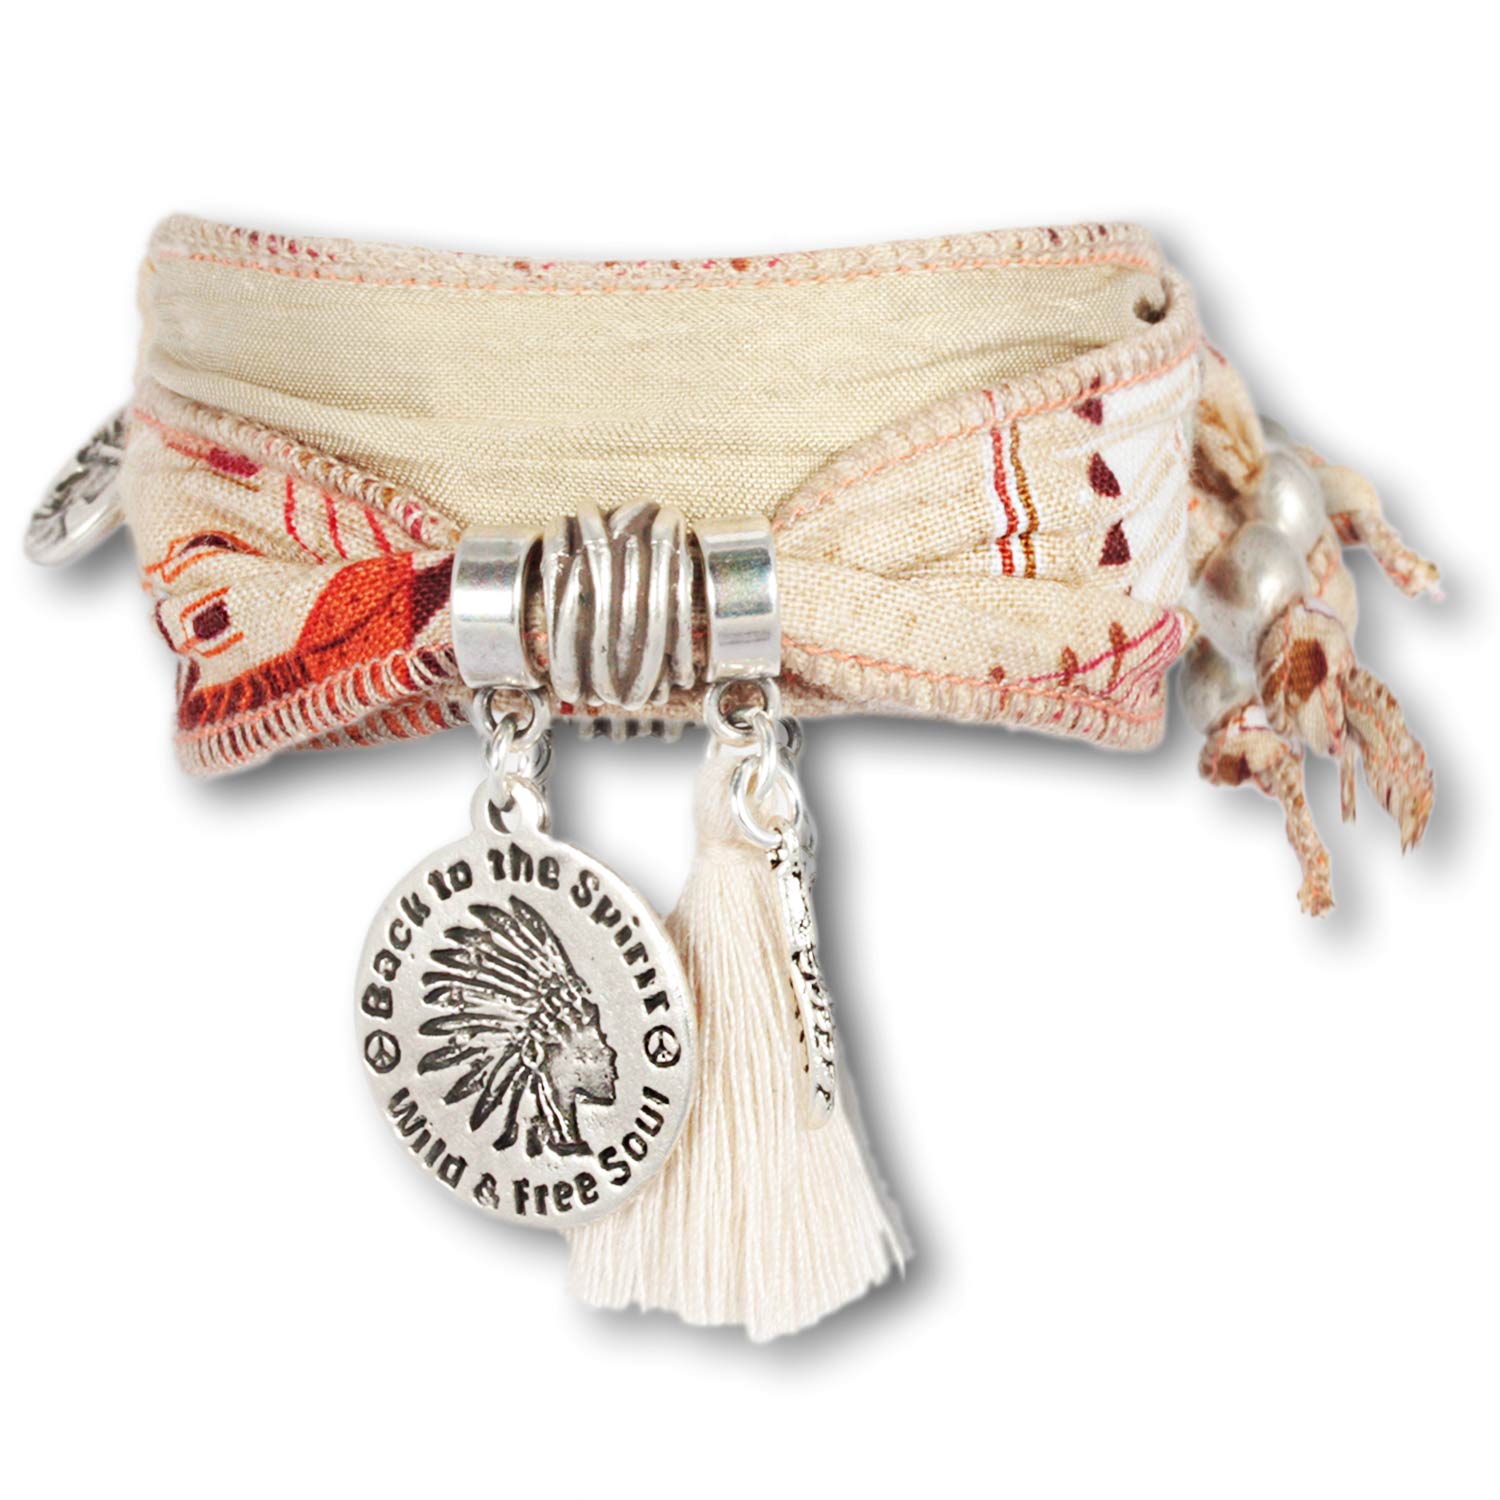 Navajo Sand Coin - coin bracelet with traditional patterns